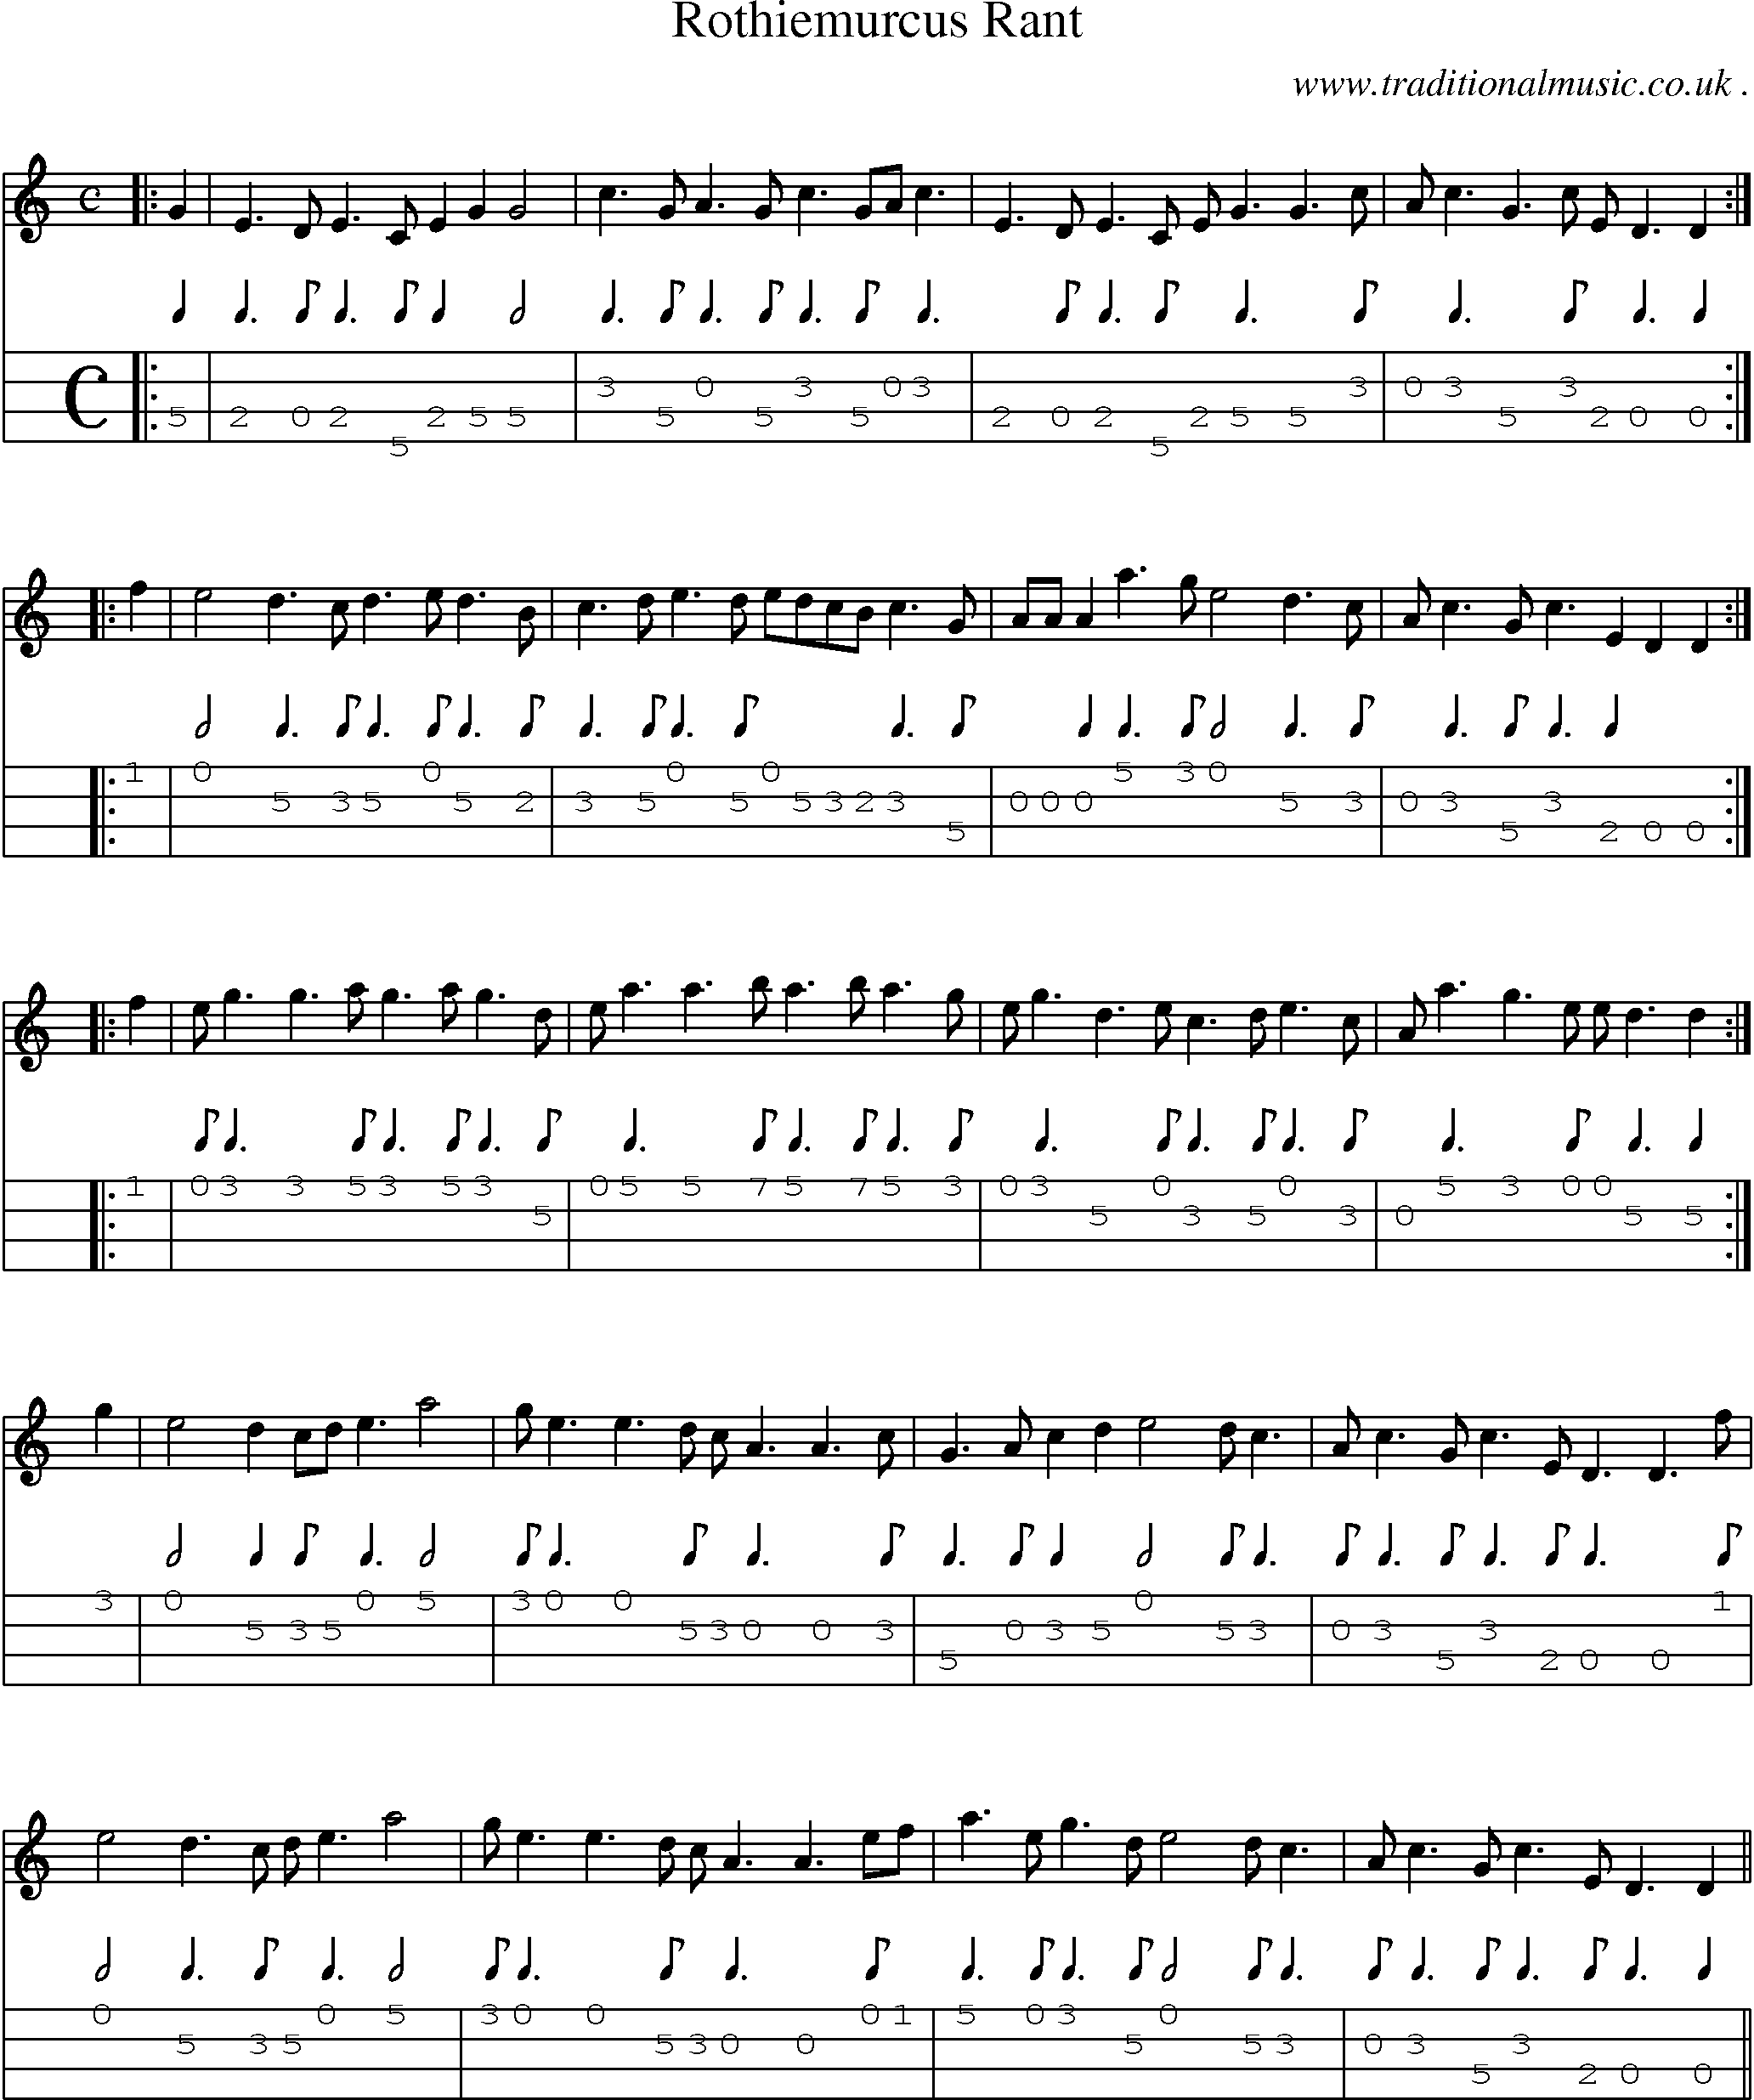 Sheet-music  score, Chords and Mandolin Tabs for Rothiemurcus Rant